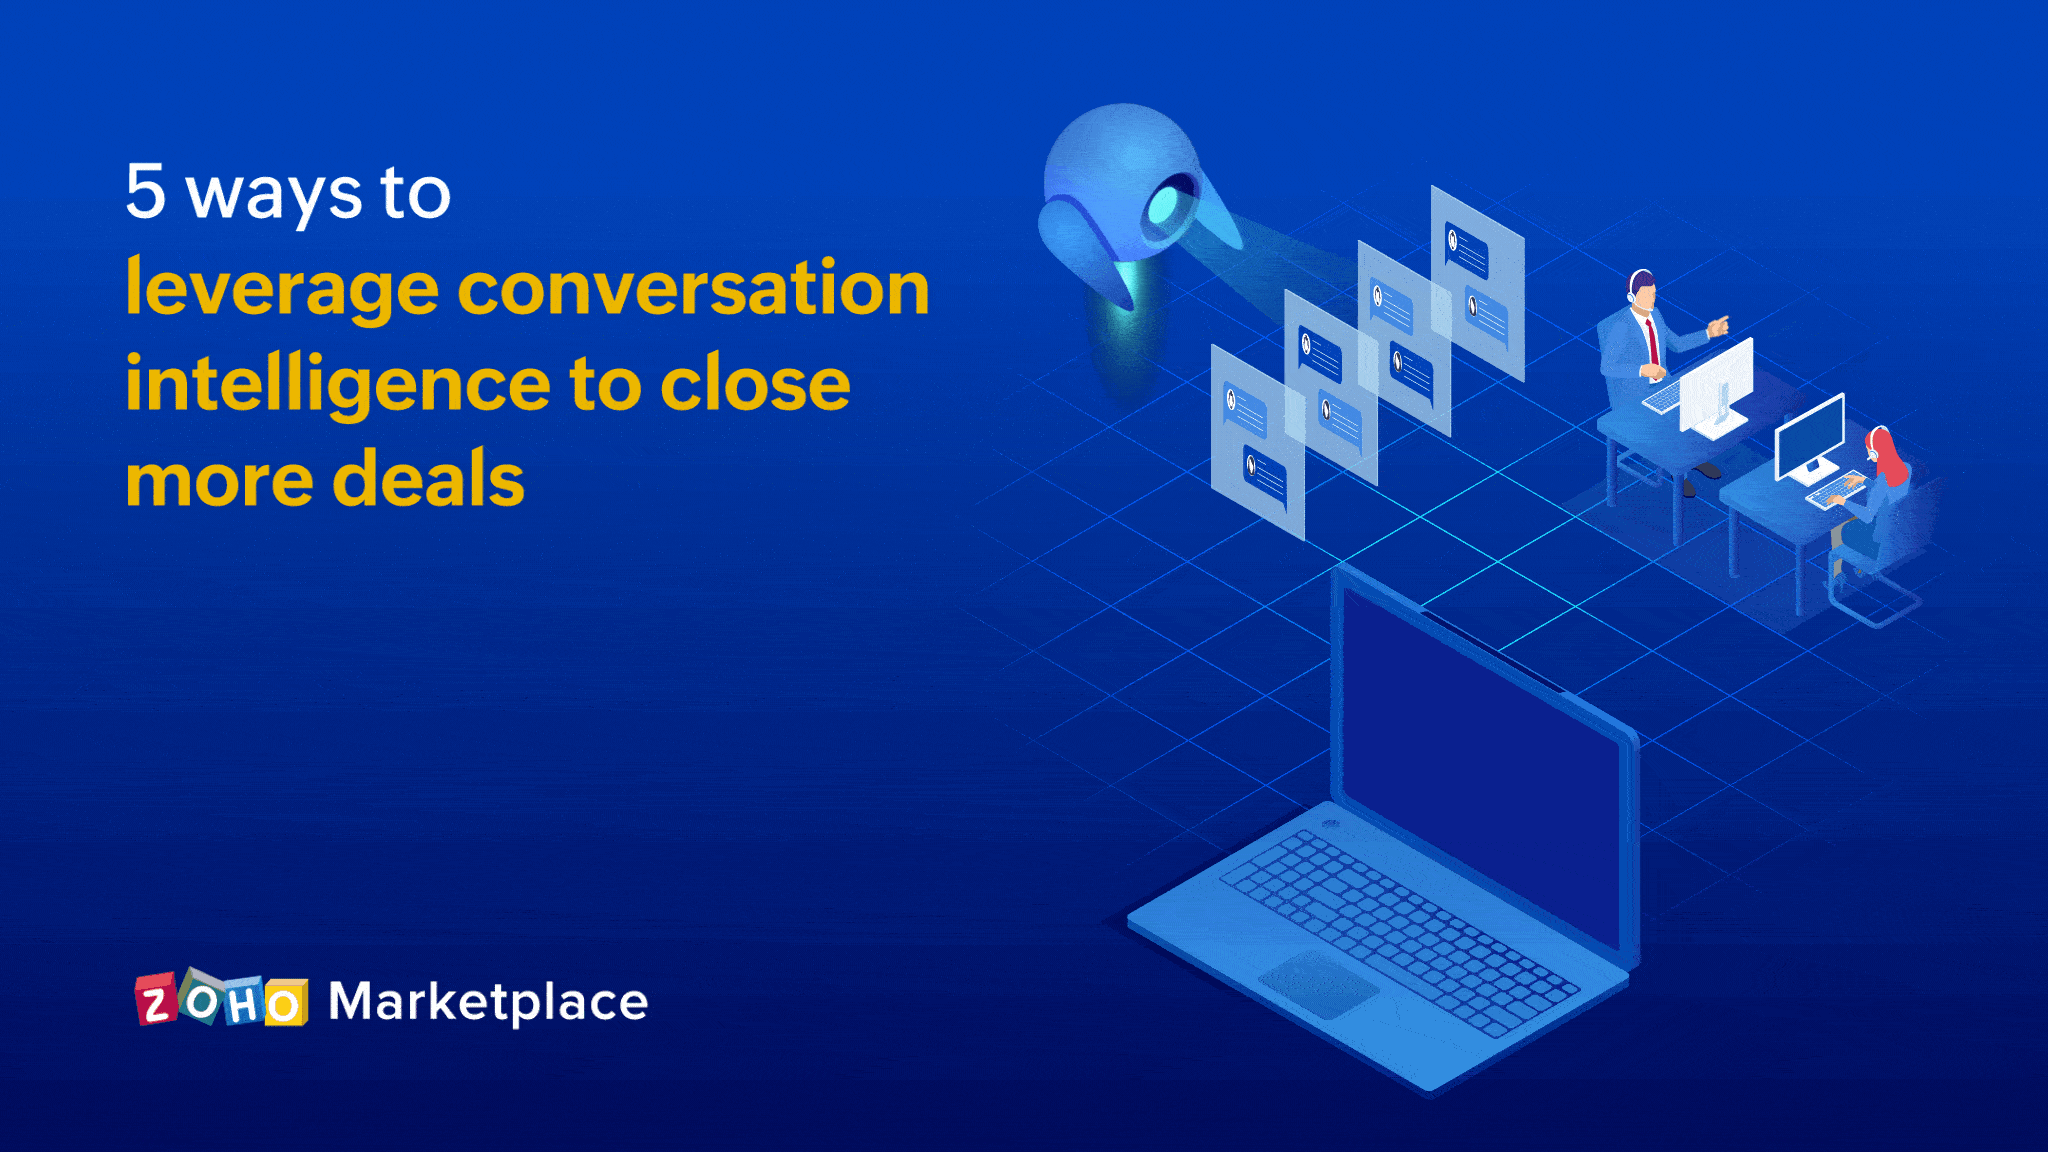 ProTips: 5 ways to leverage conversation intelligence to close more deals